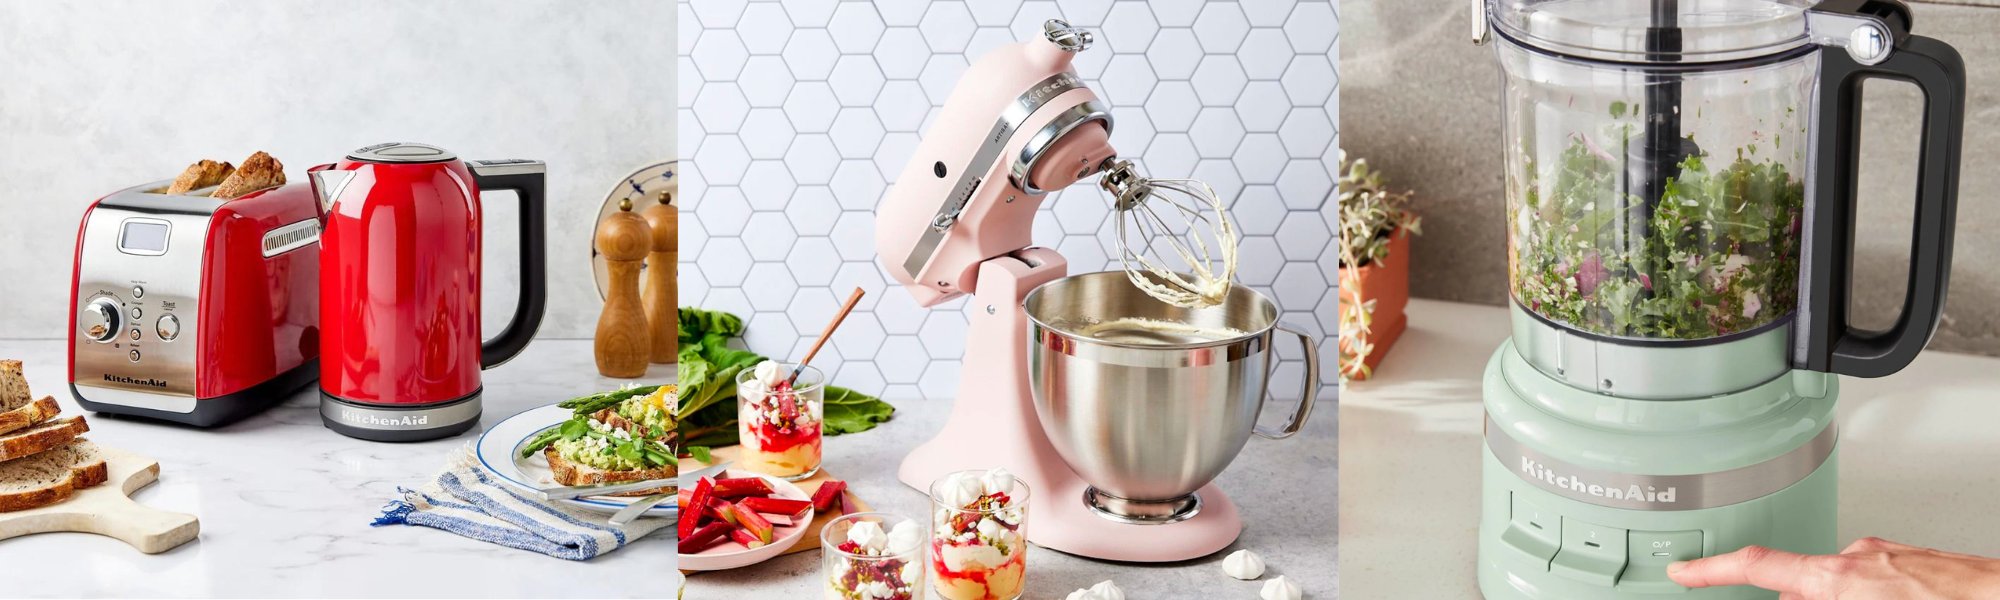 KitchenAid's iconic Empire Red collection featuring food processor, stand mixer, blender, toaster and kettle.